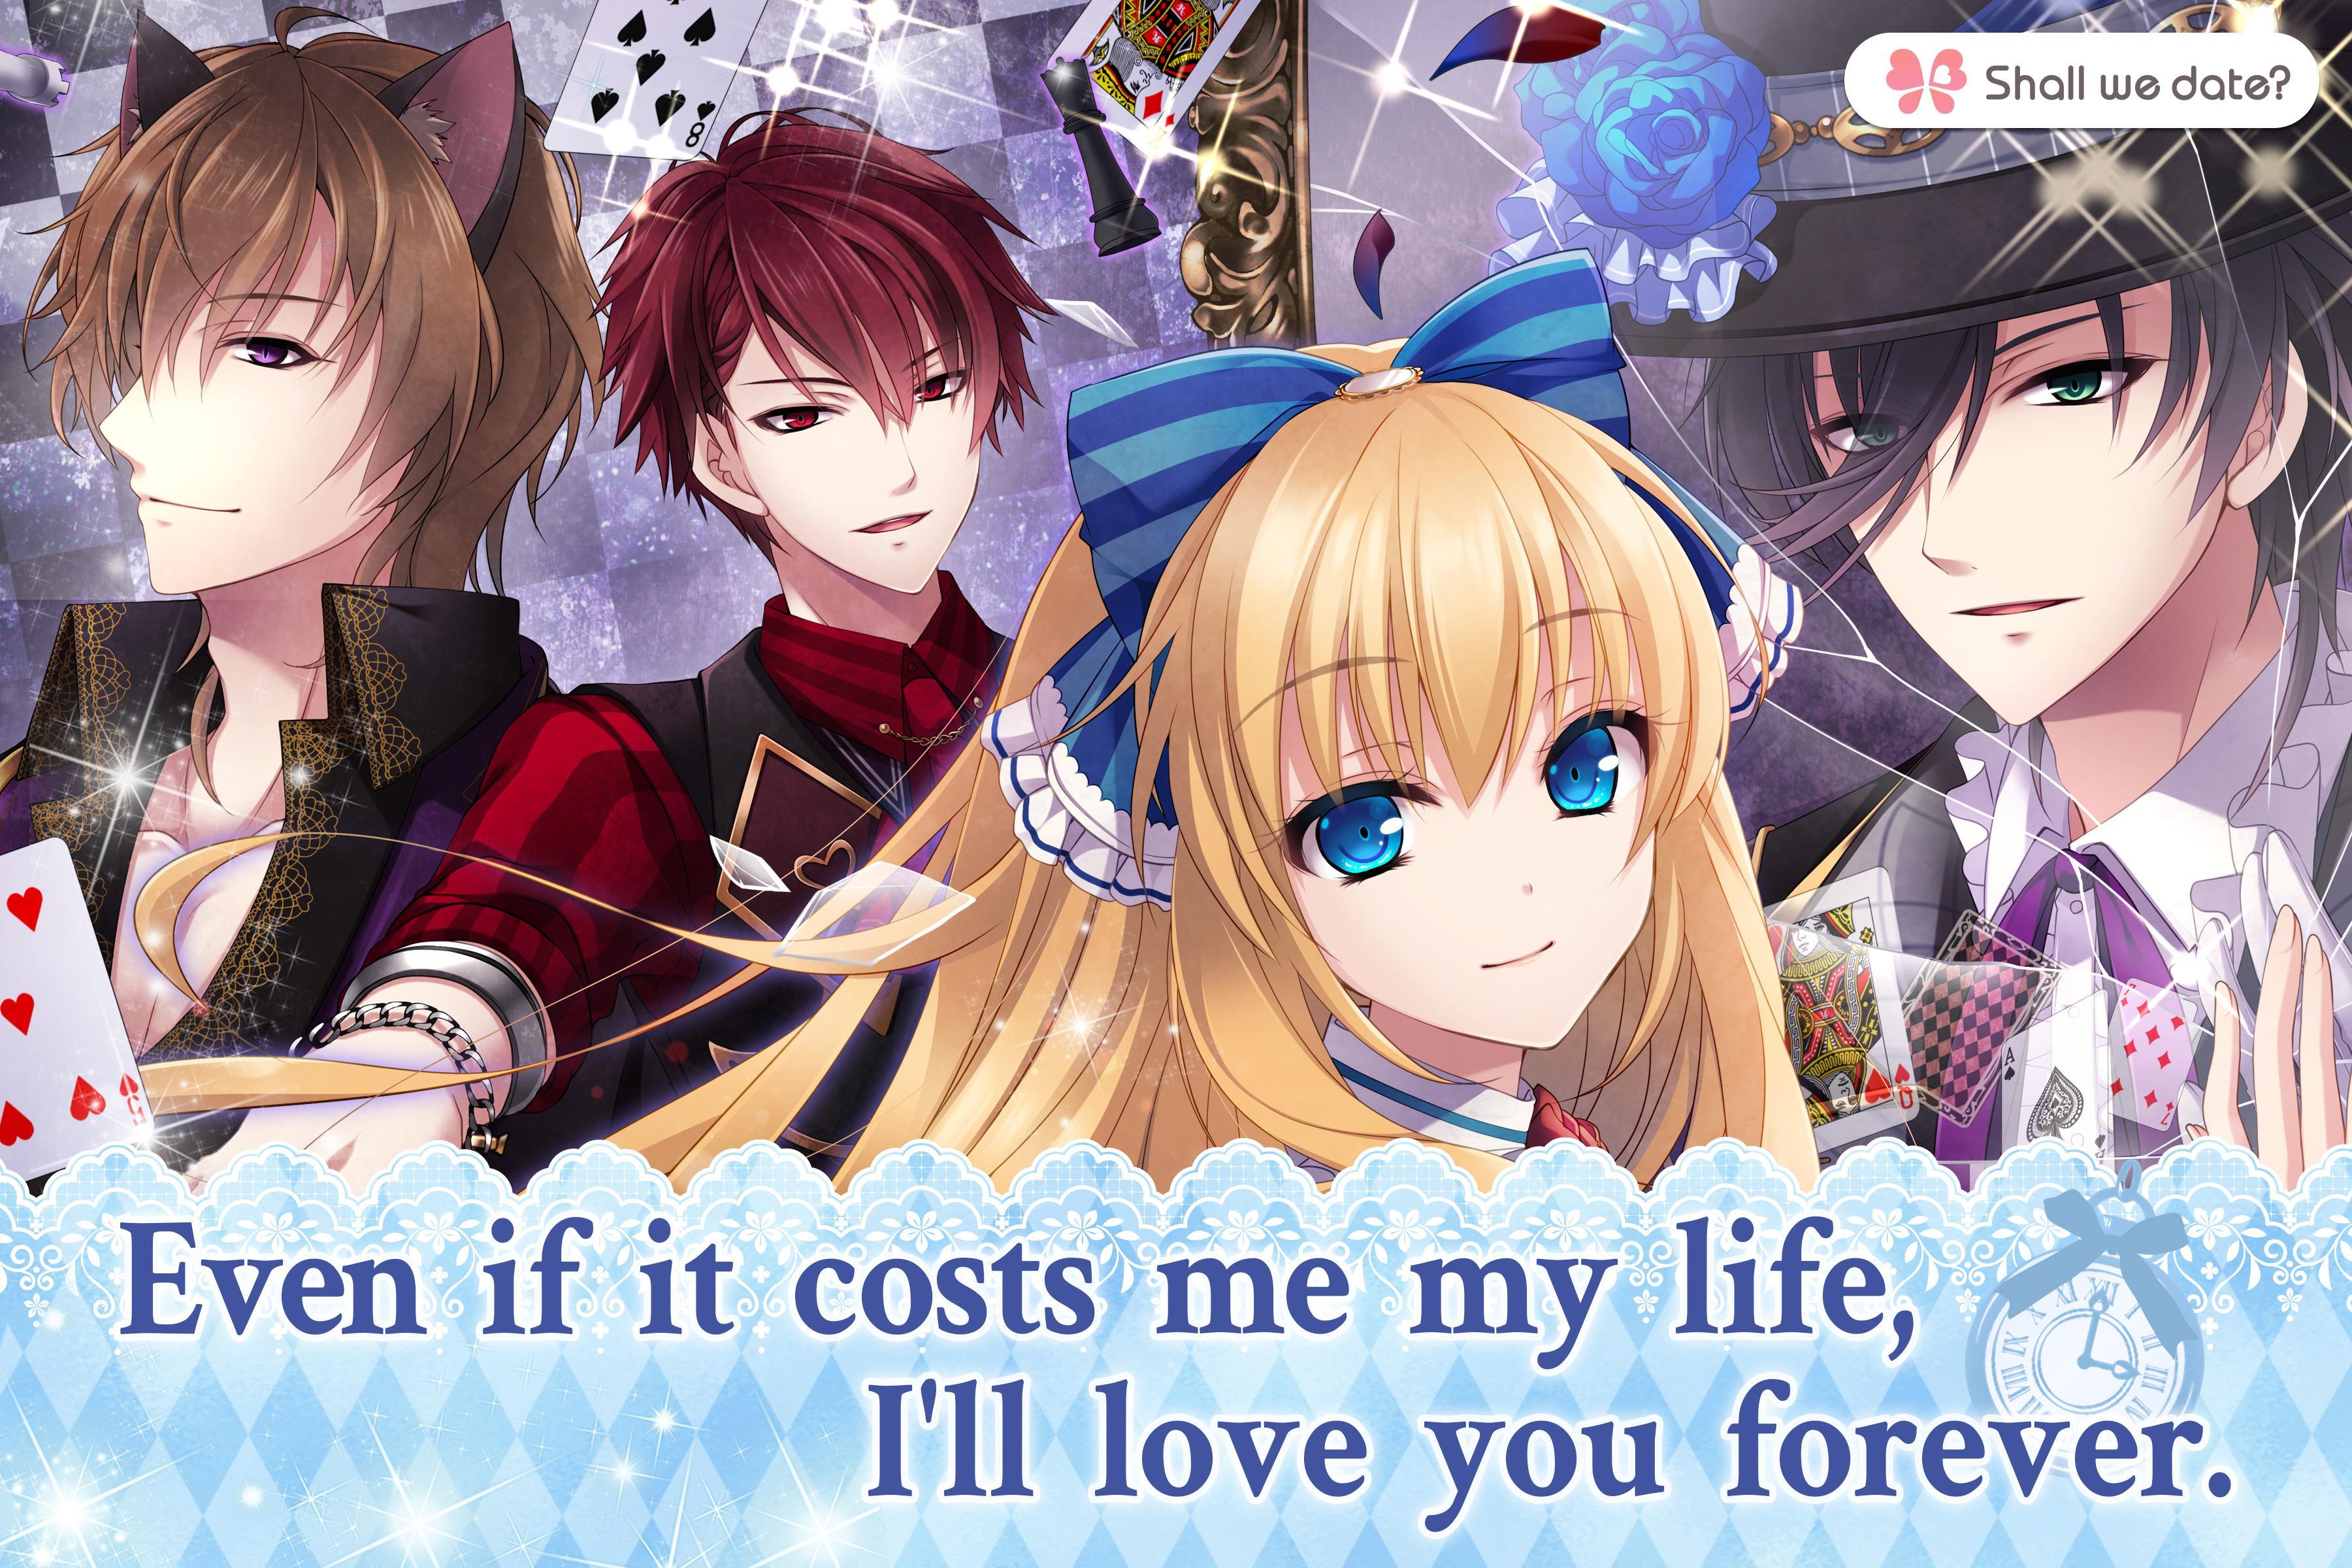 Lost Alice - otome game/dating sim #shall we date 1.5.1 Screenshot 13